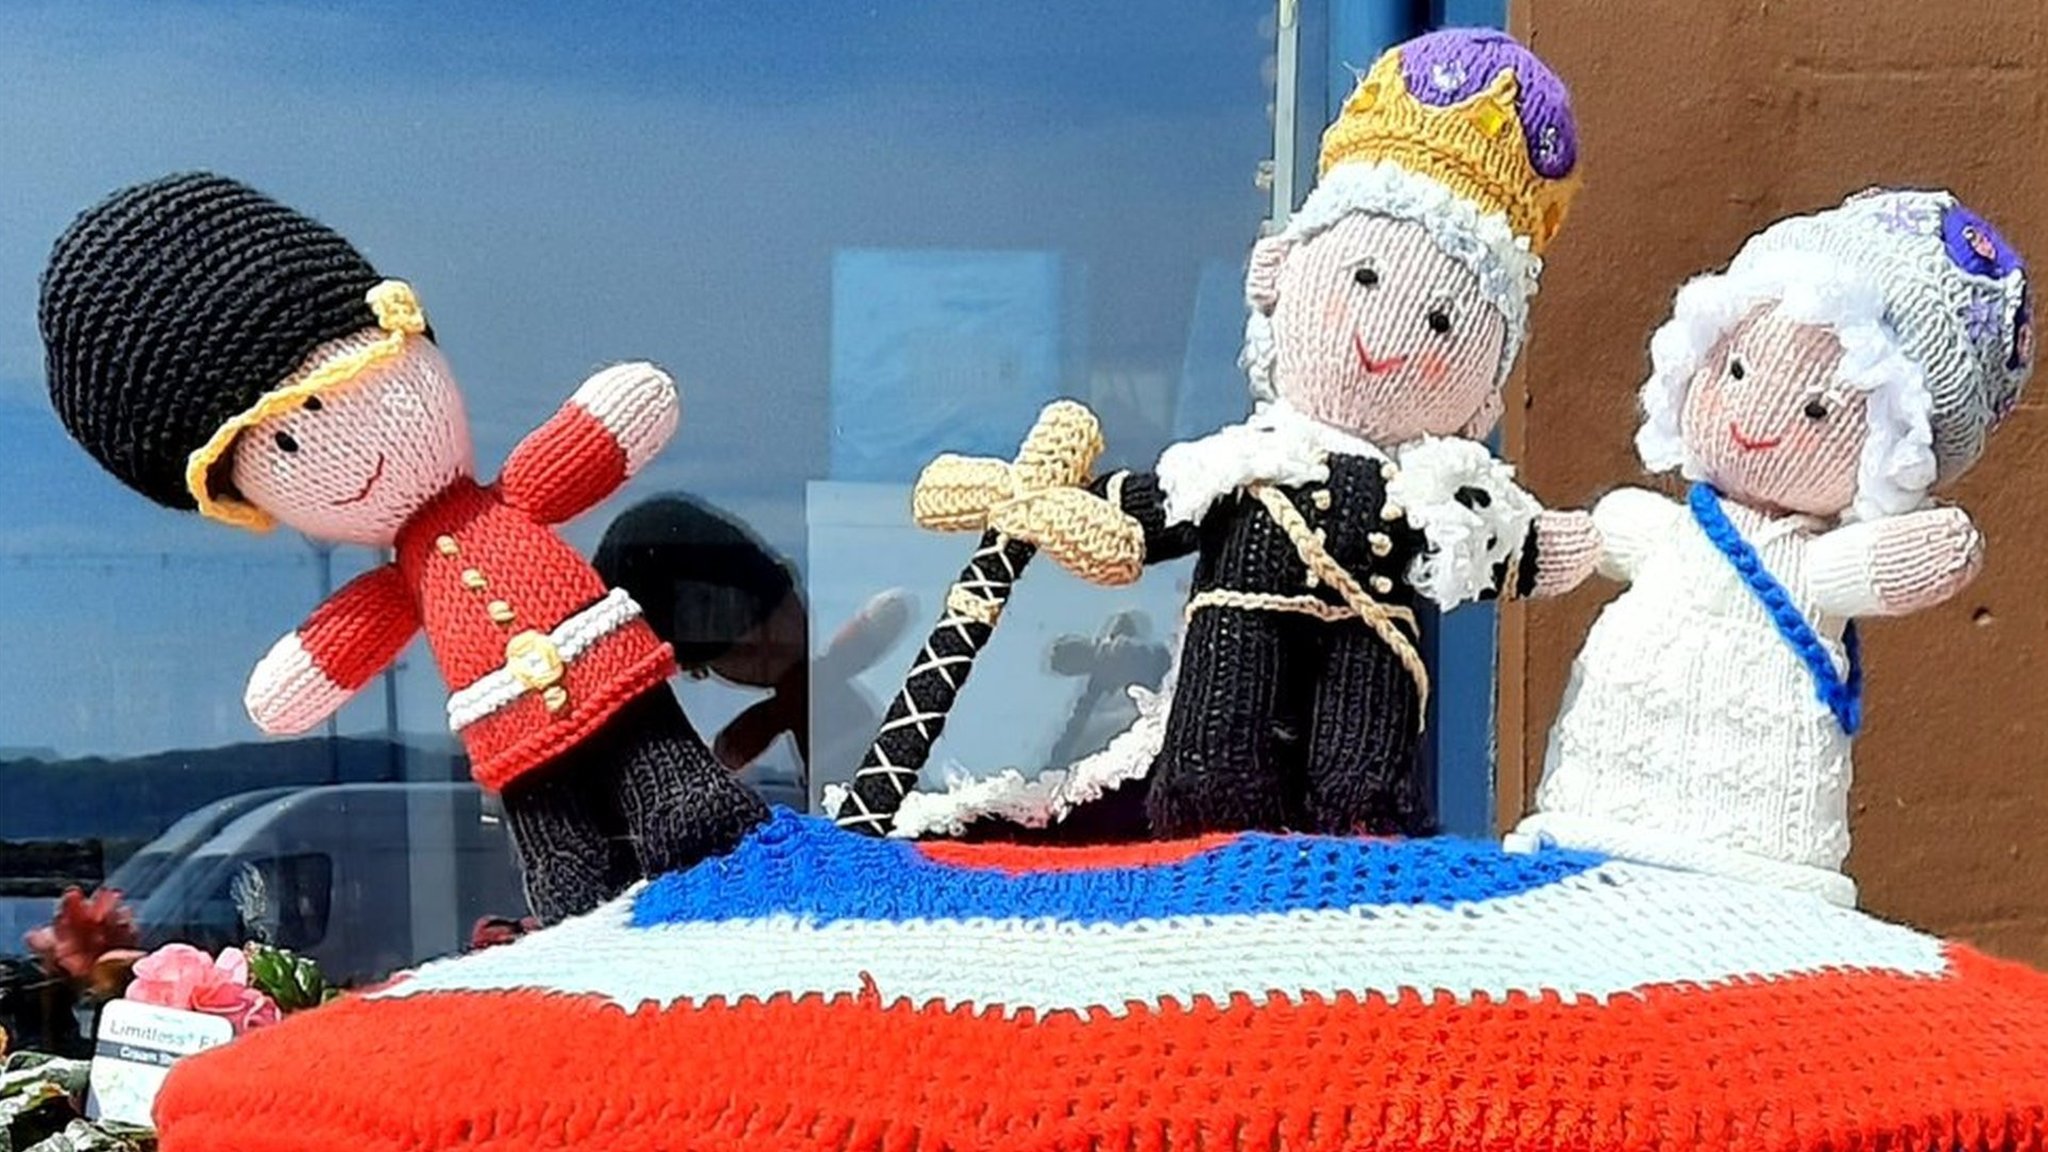 Crafters celebrate King's crochet-nation